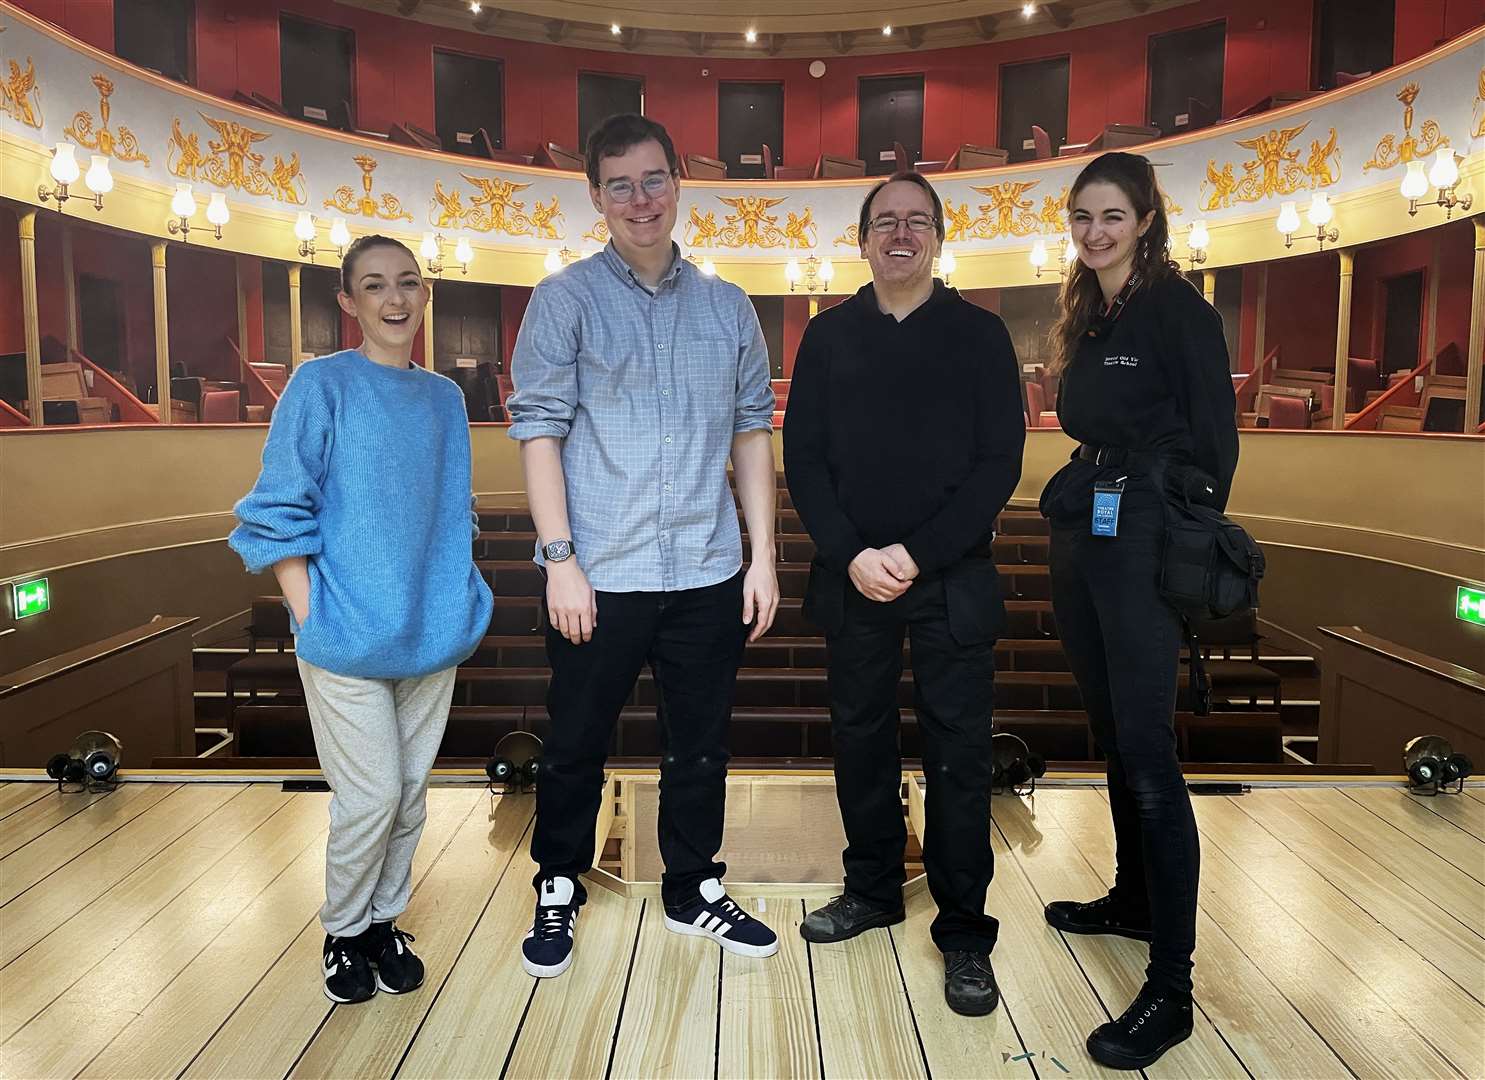 Left to right: Dance captain Lizzie Buckingham, musical director Ben Garnett, senior technician Chris Last and assistant stage manager Tabitha Dodds at the Theatre Royal, Bury St Edmunds